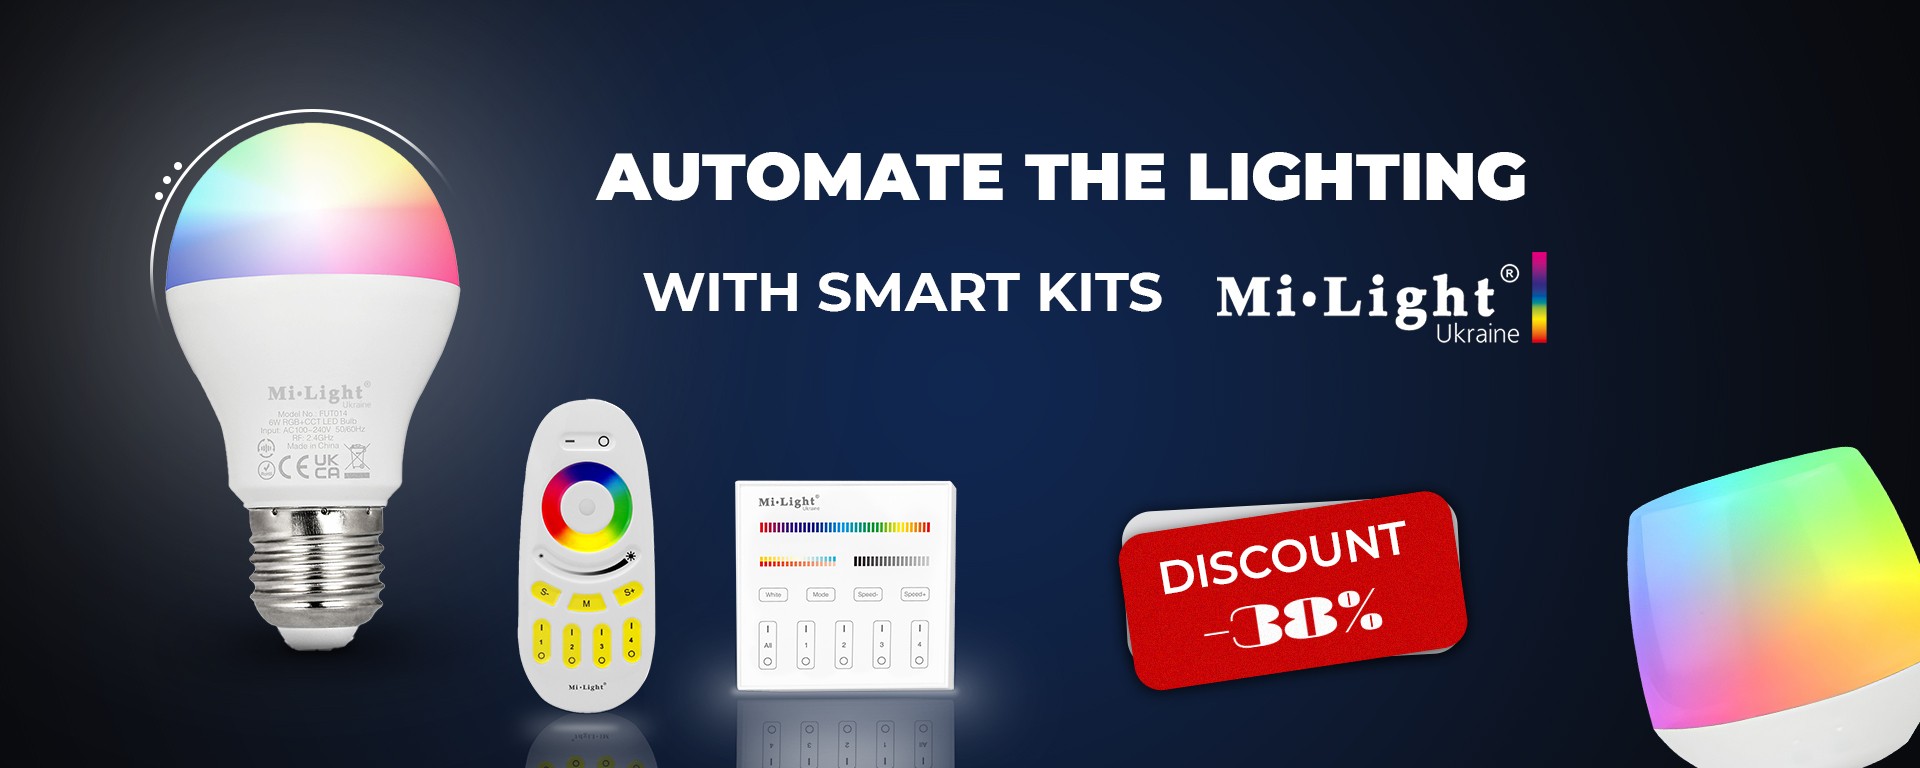 Automate your lighting with Smart Kits from MiLight - Up to 30% off